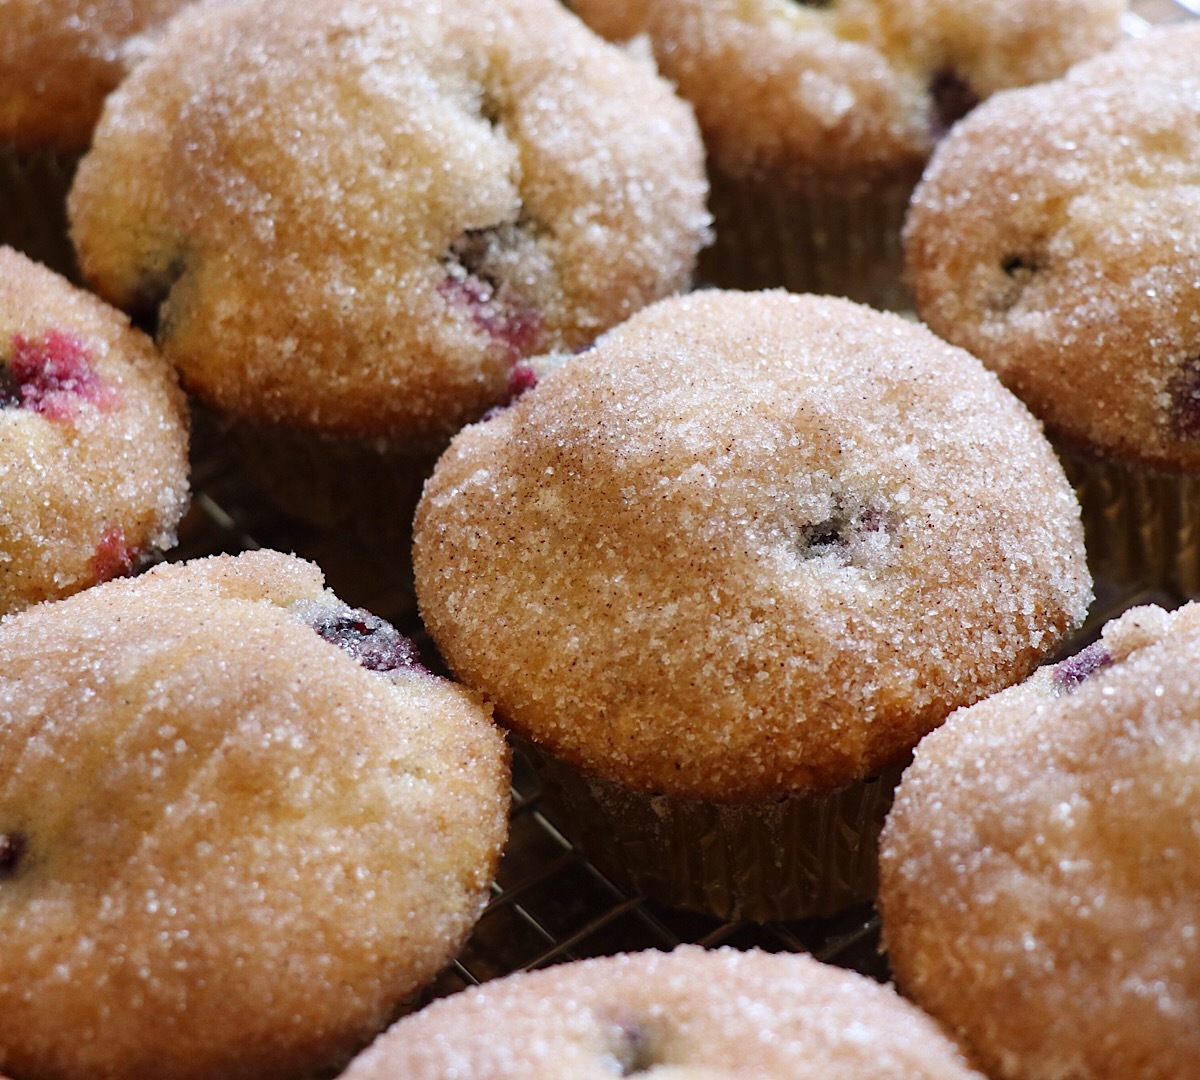 Sour Cream and Cardamom Blueberry Muffins